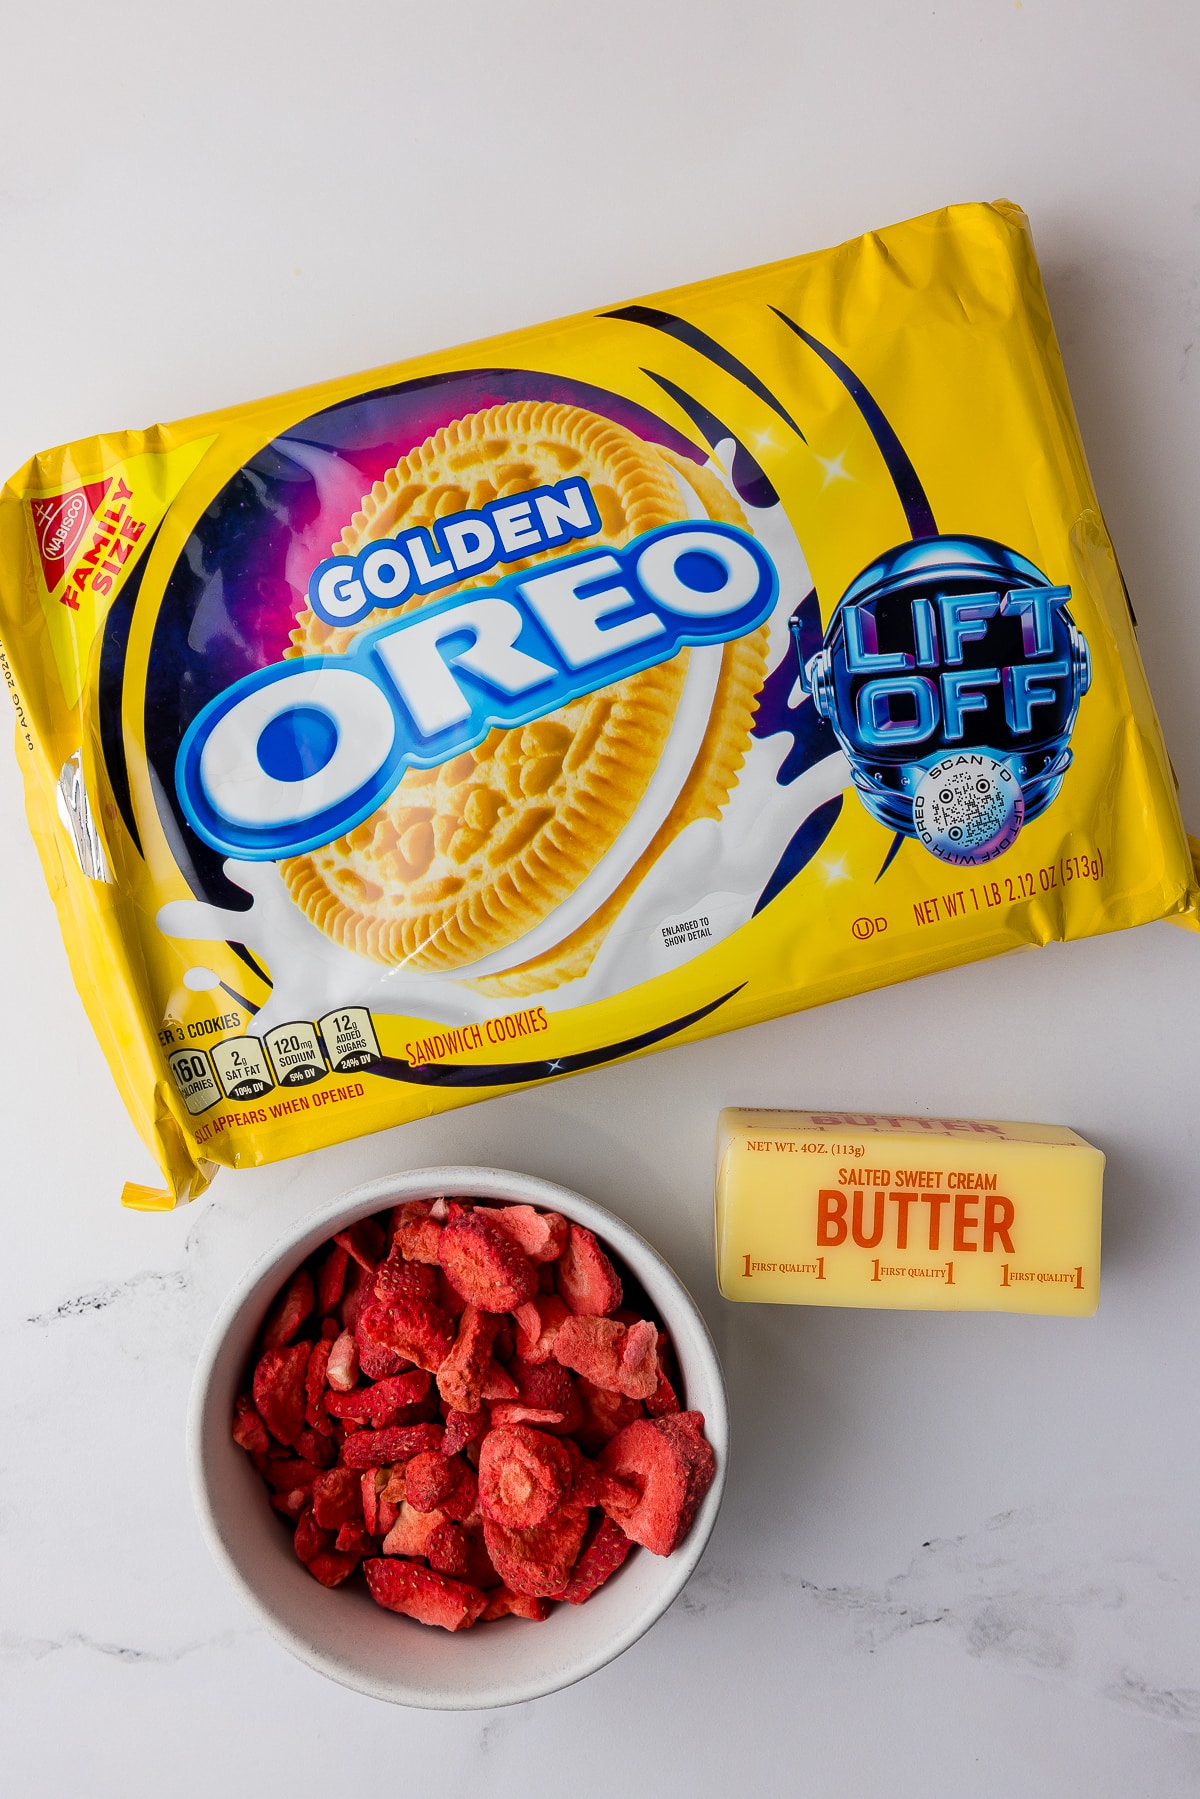 Package of golden oreos, white bowl of freeze dried strawberries, and a cube of butter on a white countertop